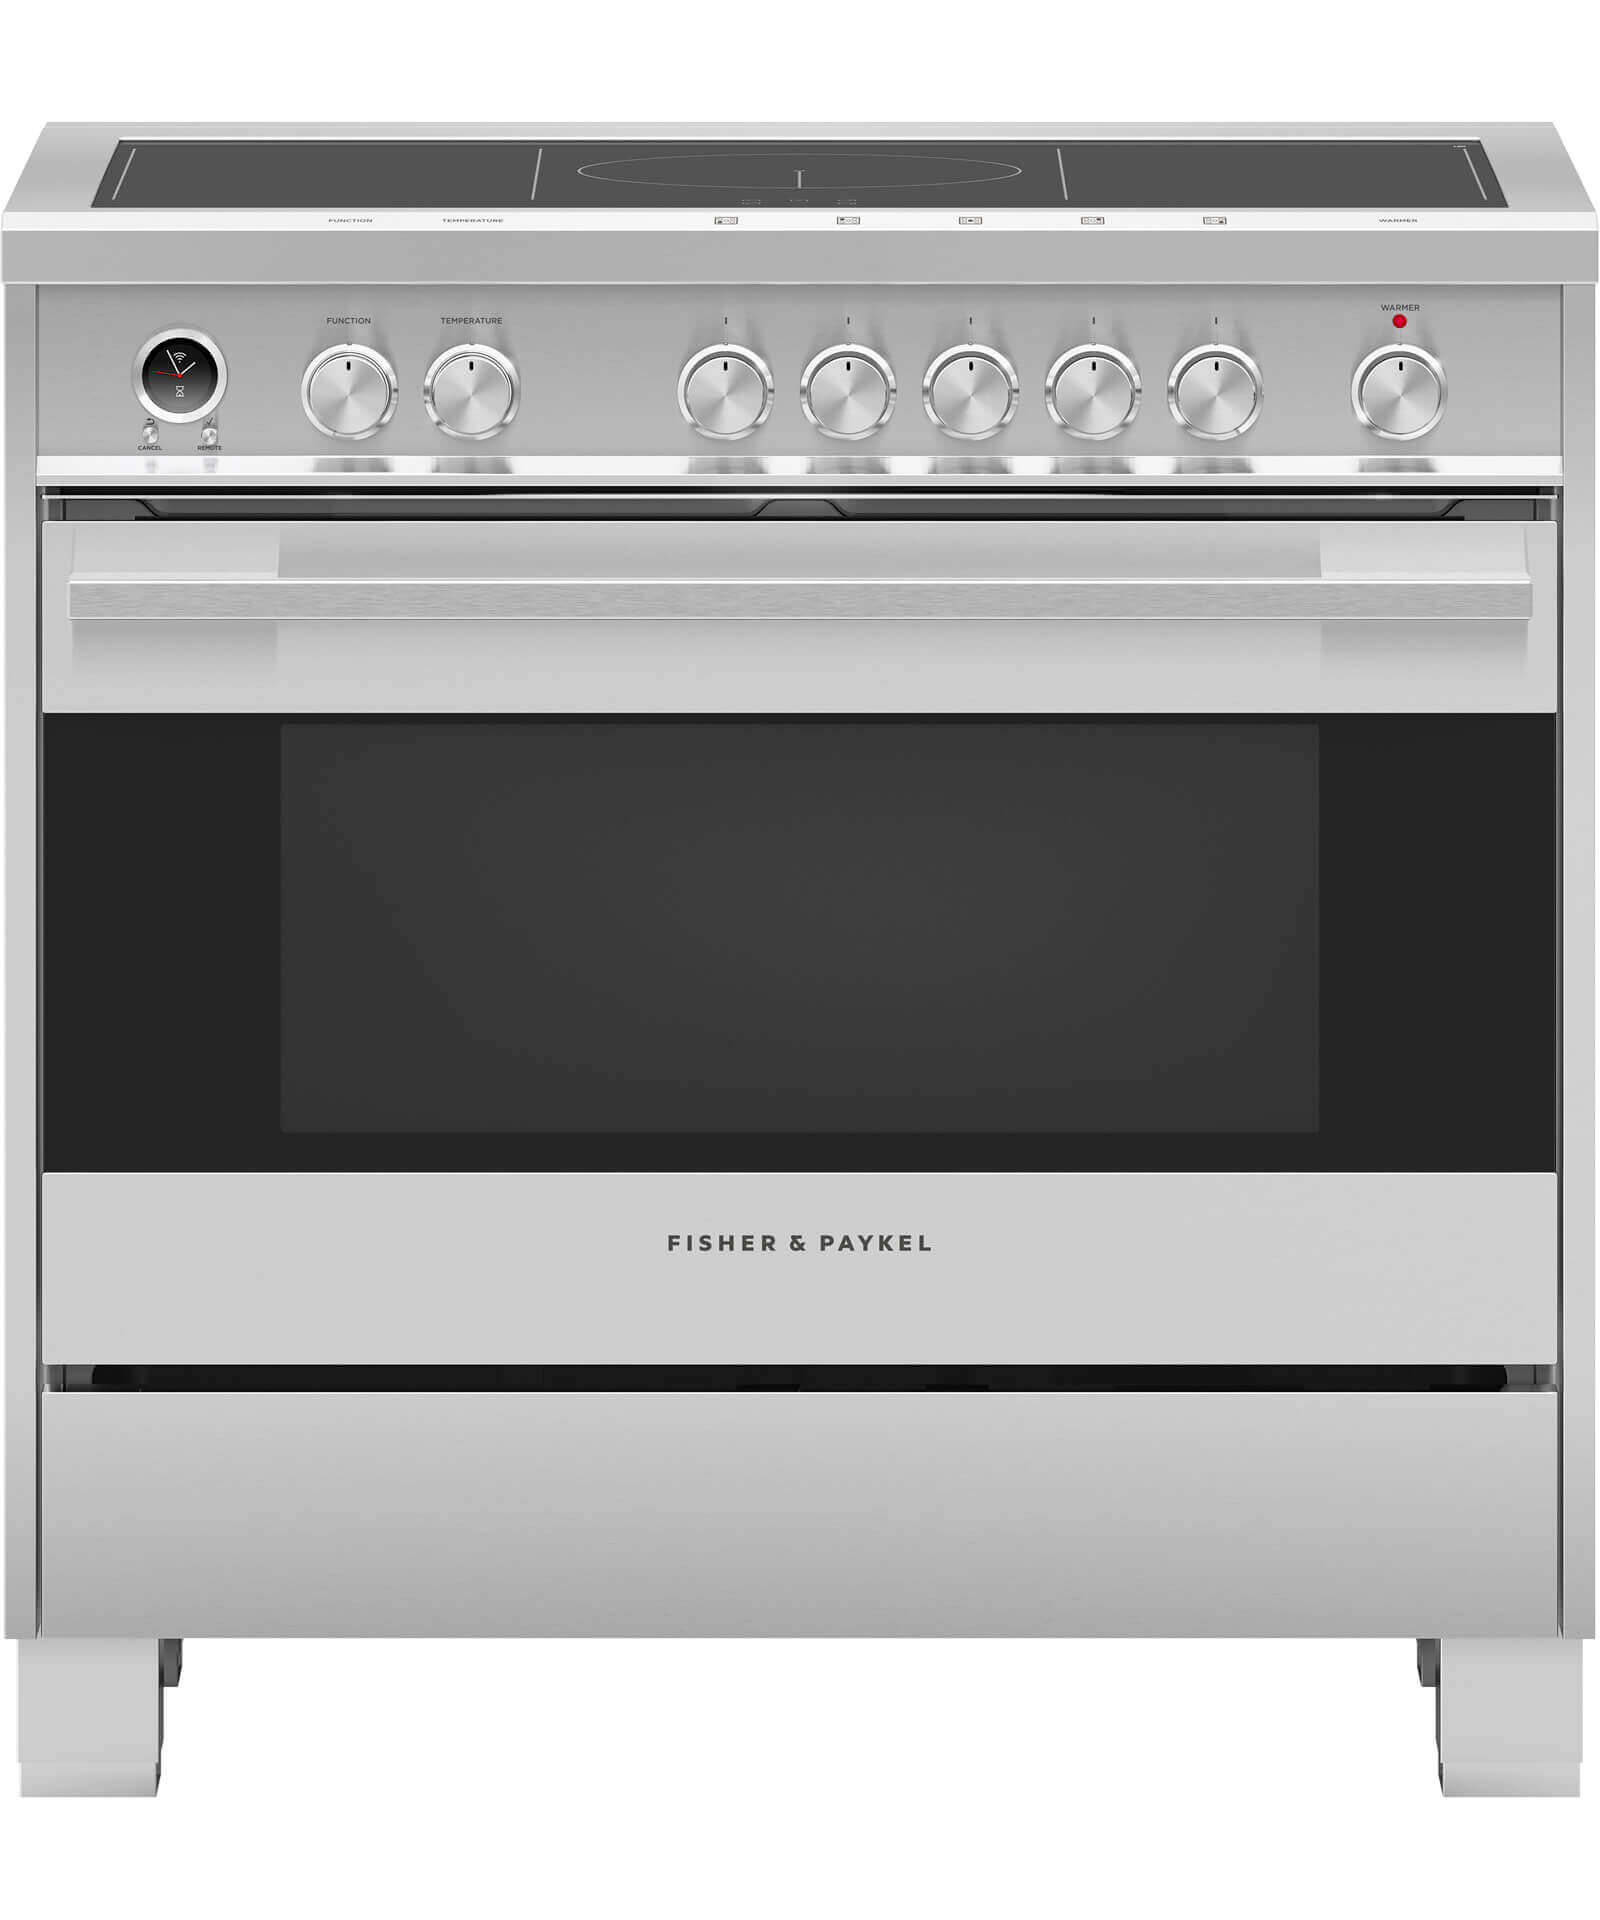 or36sdi6x1-induction-range-36-with-self-cleaning-oven-fisher